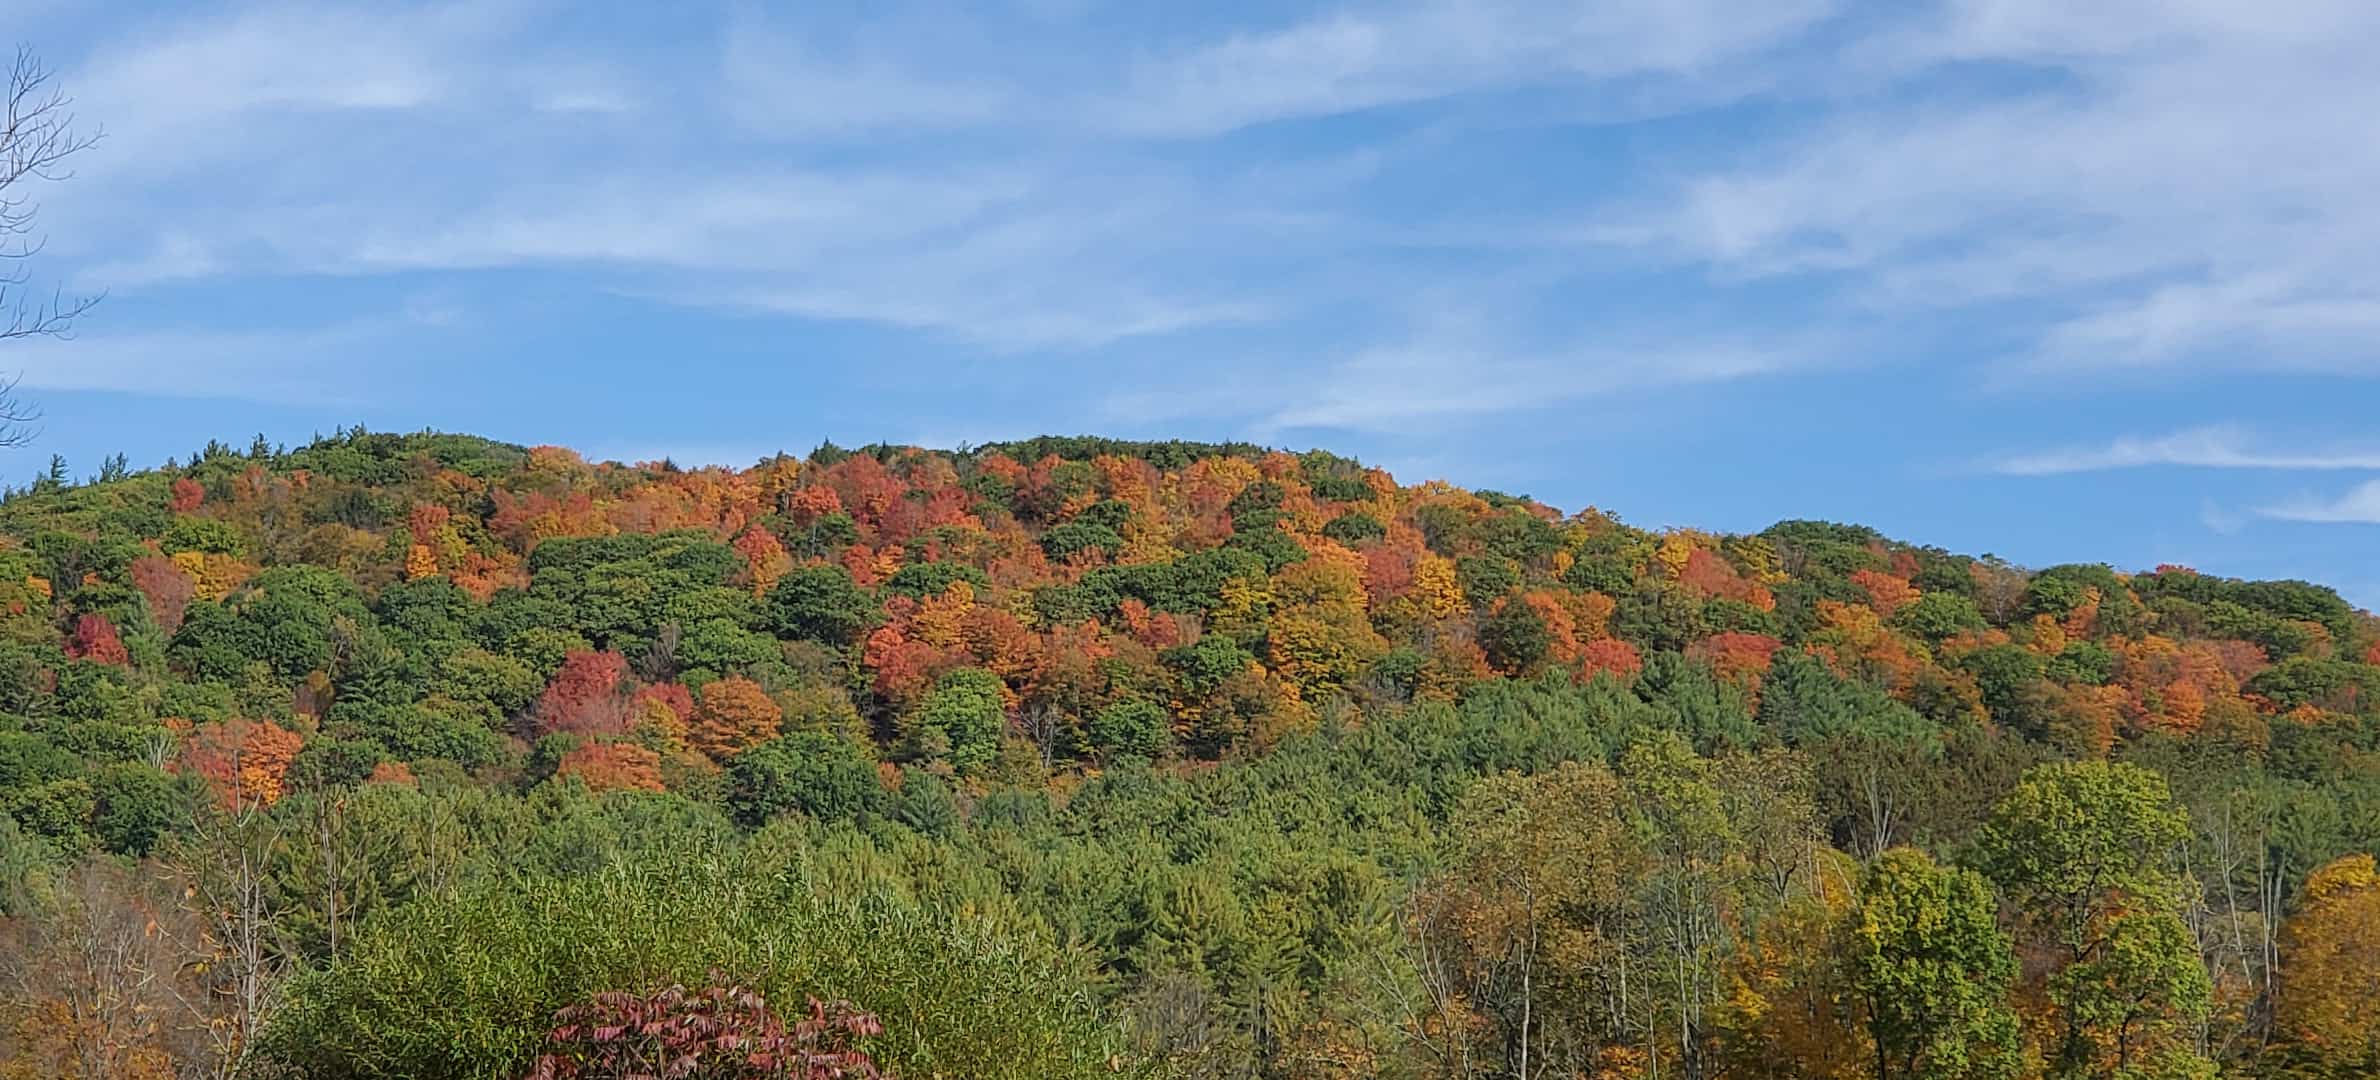 2019/10/08 - View from Rt 11 near Springfield, VT - by Renée-Marie Smith